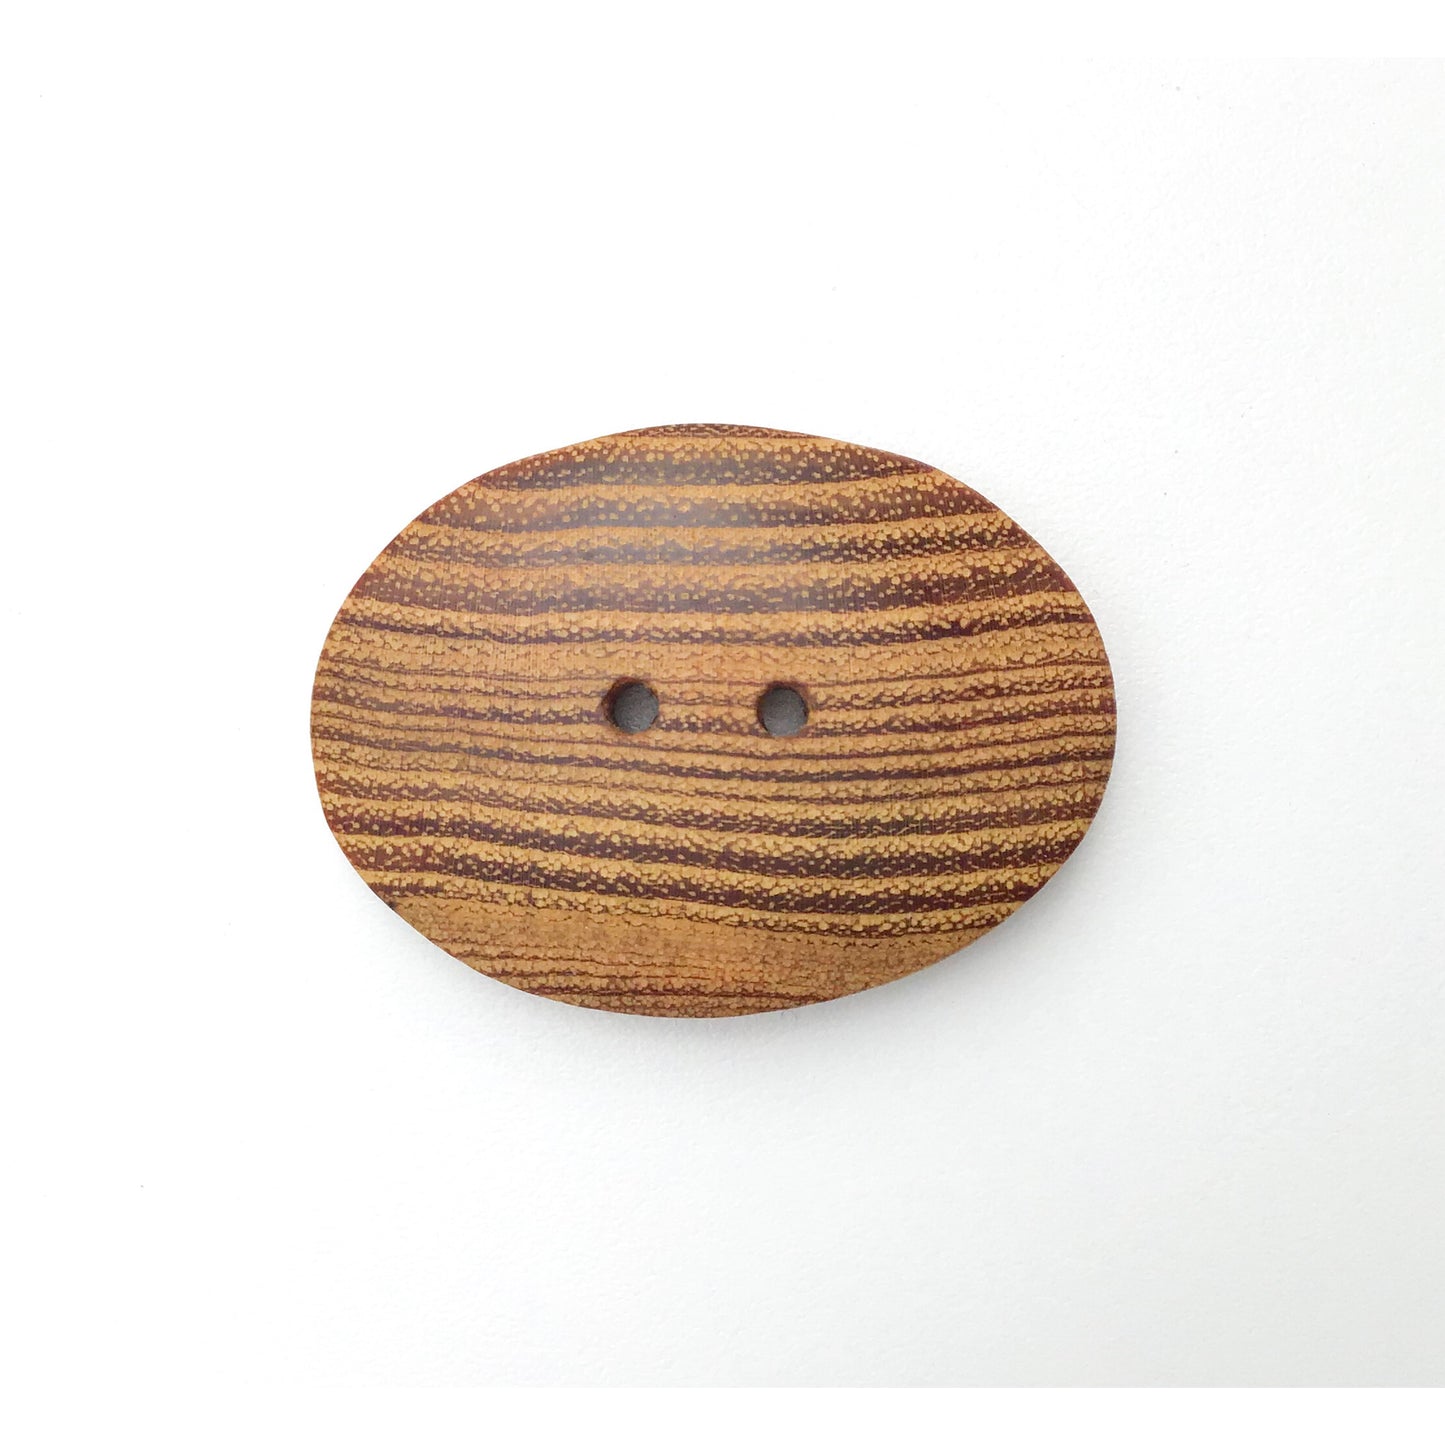 Oval Black Locust Wood Buttons - Large Wooden Button - 1 1/2" x 2"